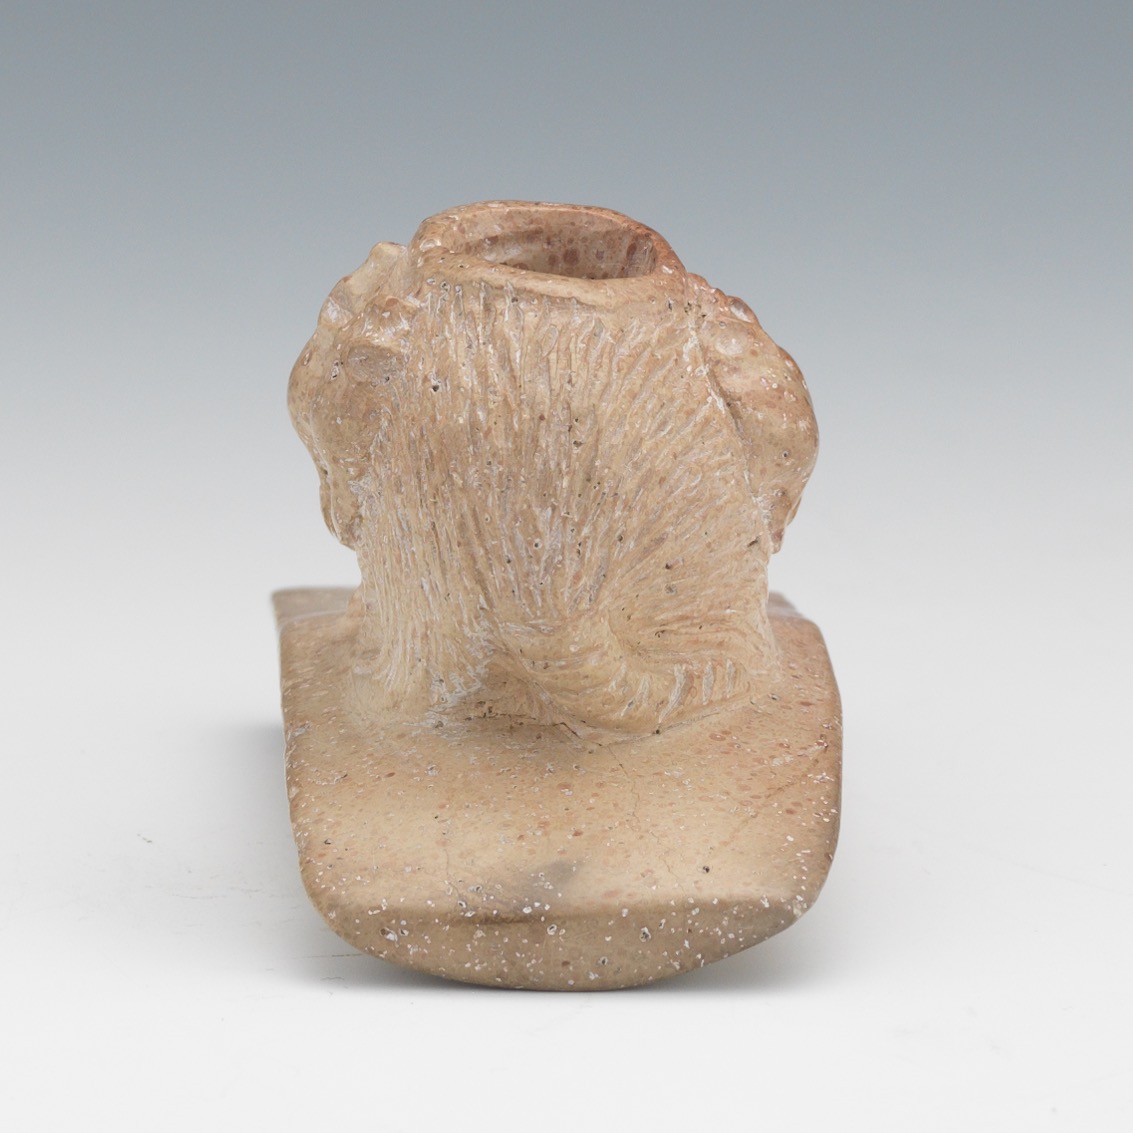 Carved Effigy Pipe of an Opssom - Image 5 of 7